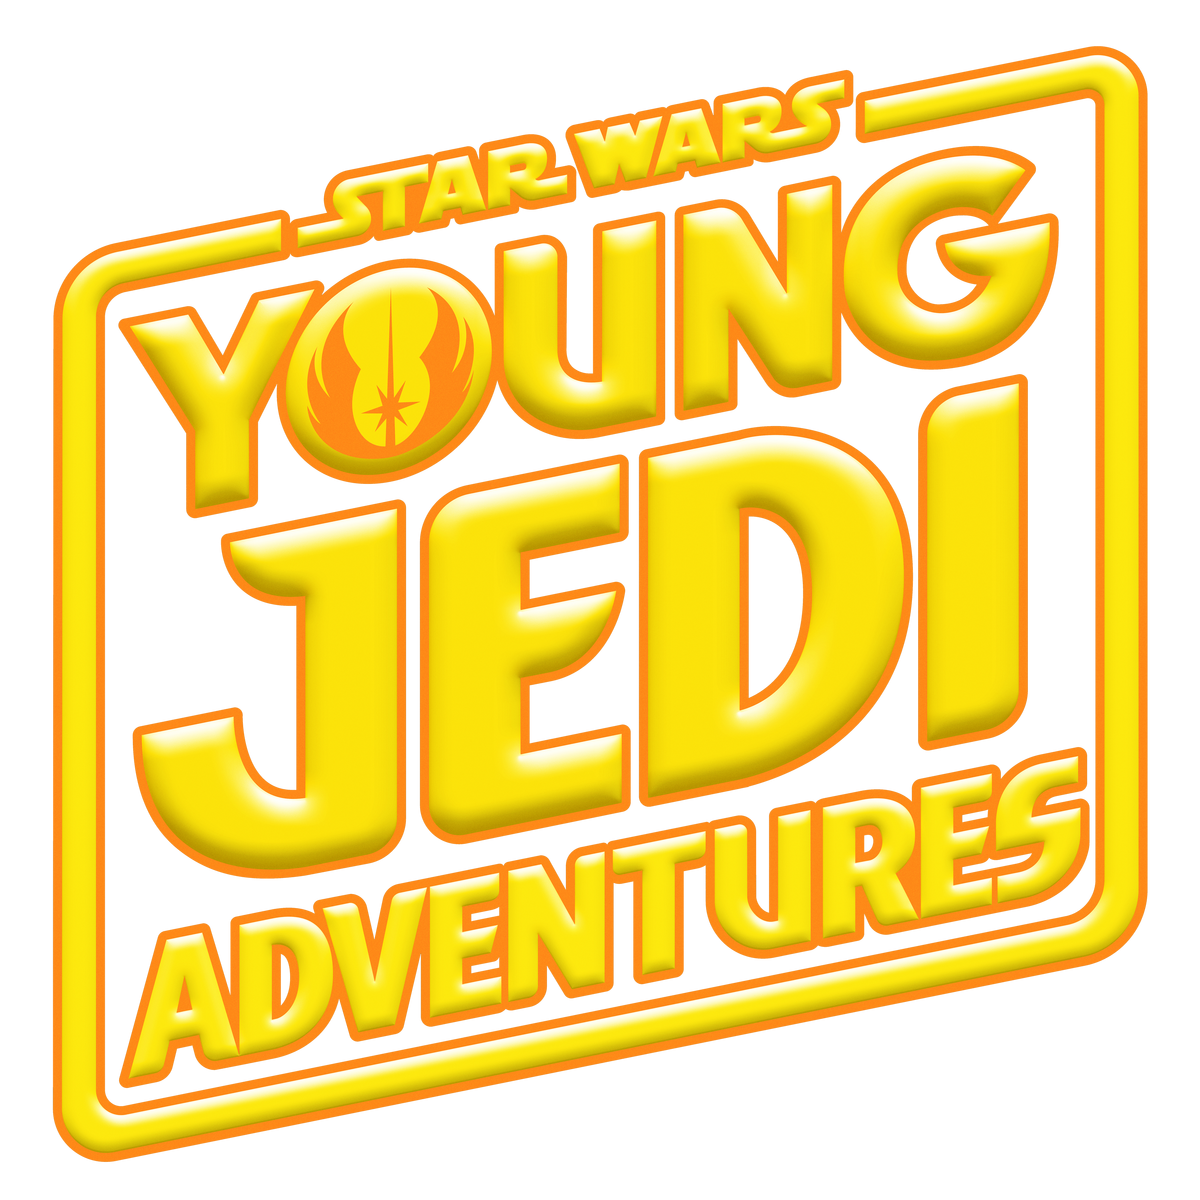 Everything you need to know about Star Wars: Young Jedi Adventures